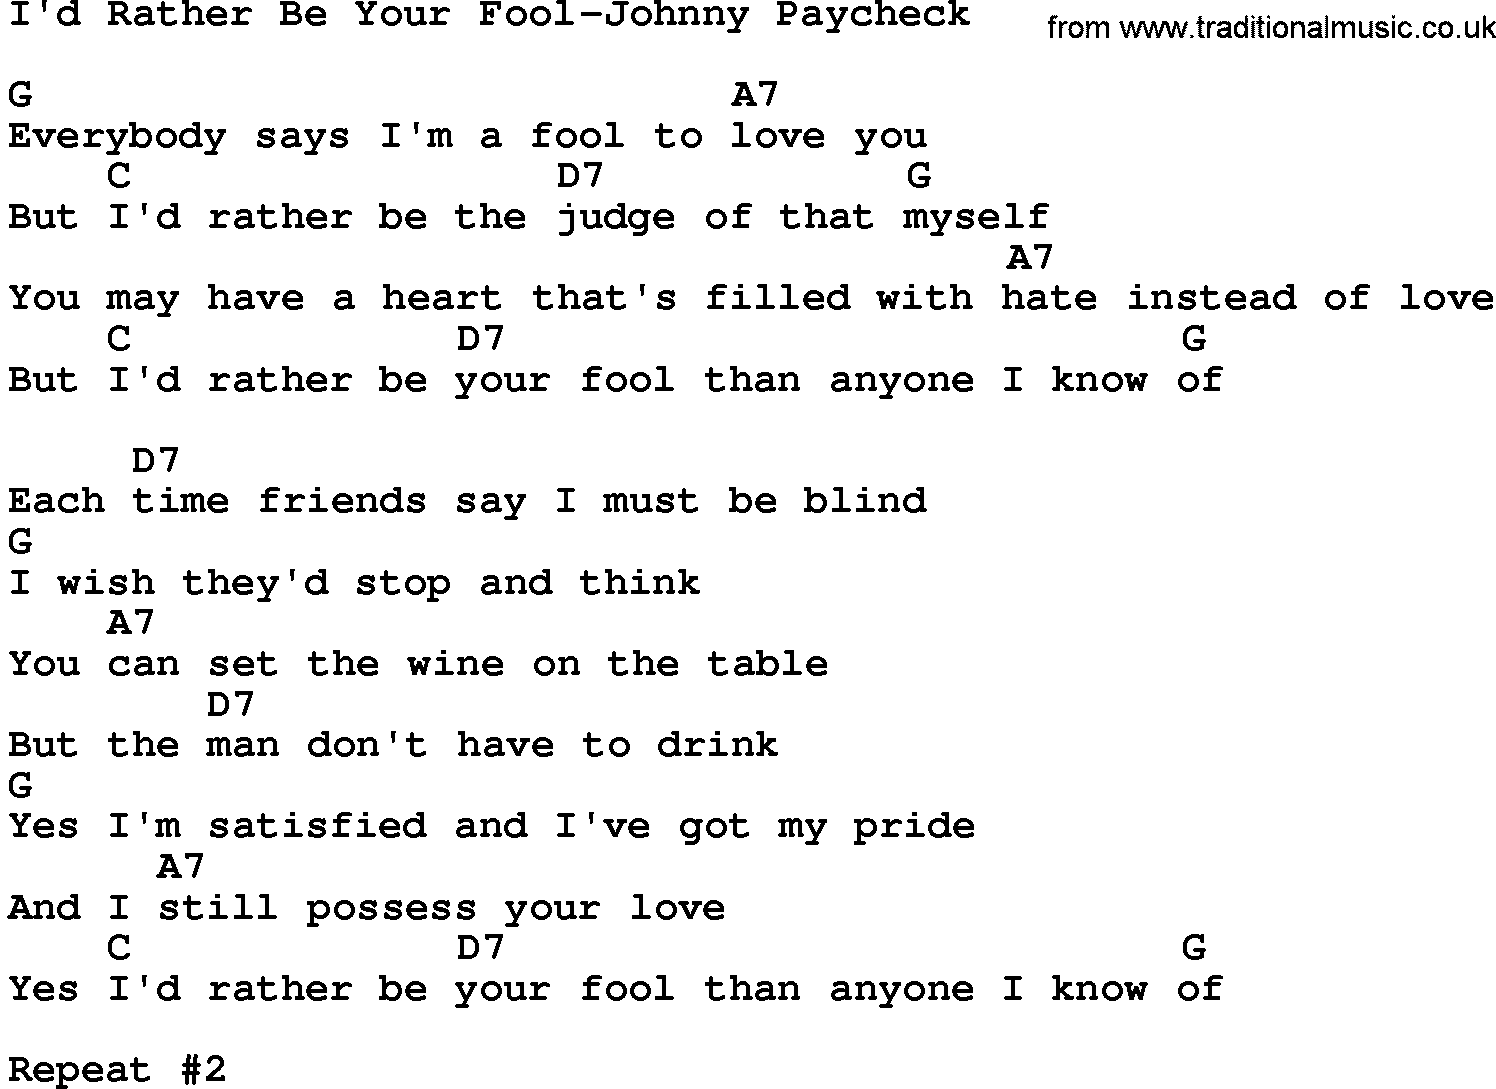 Country music song: I'd Rather Be Your Fool-Johnny Paycheck lyrics and chords